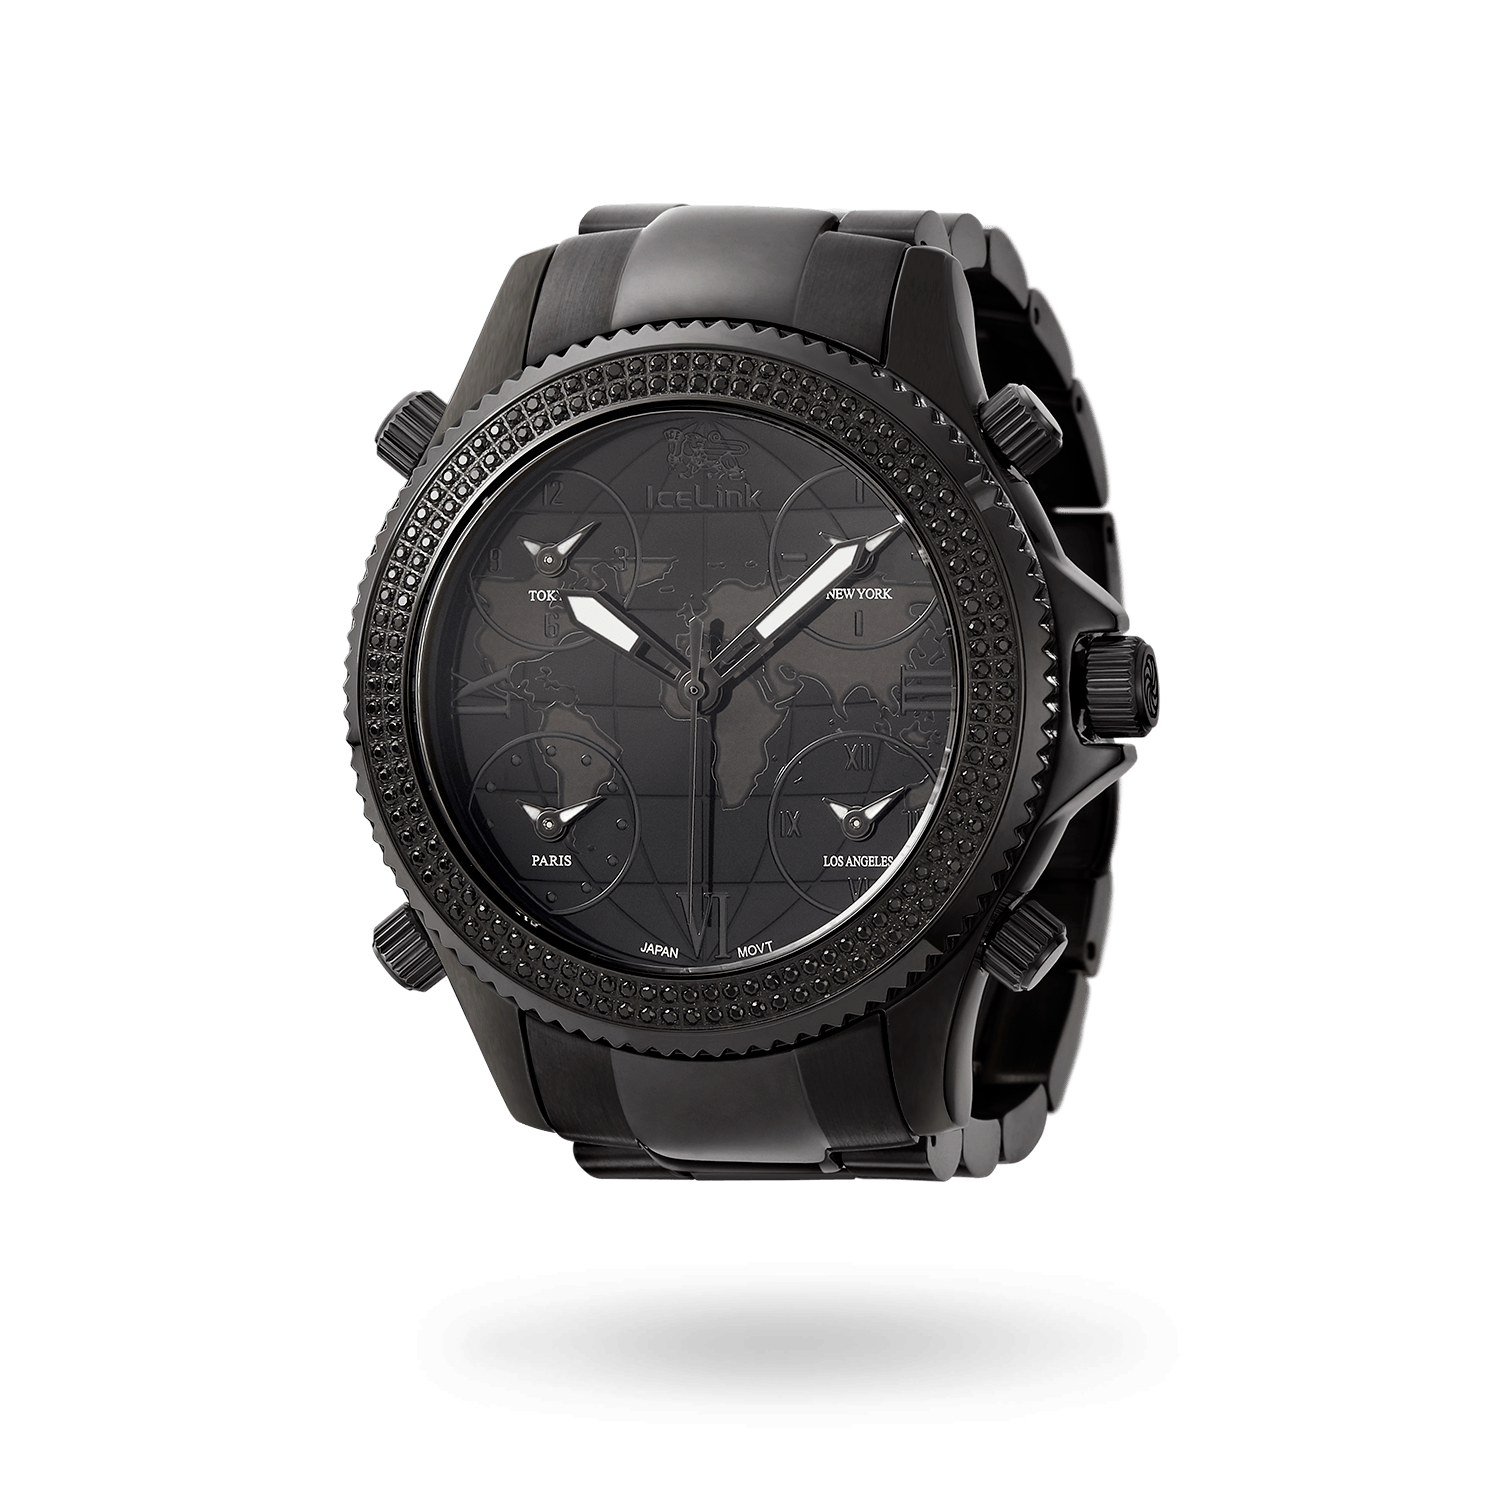 Marco Polo Black (sample sale) Watches IceLink-TI   